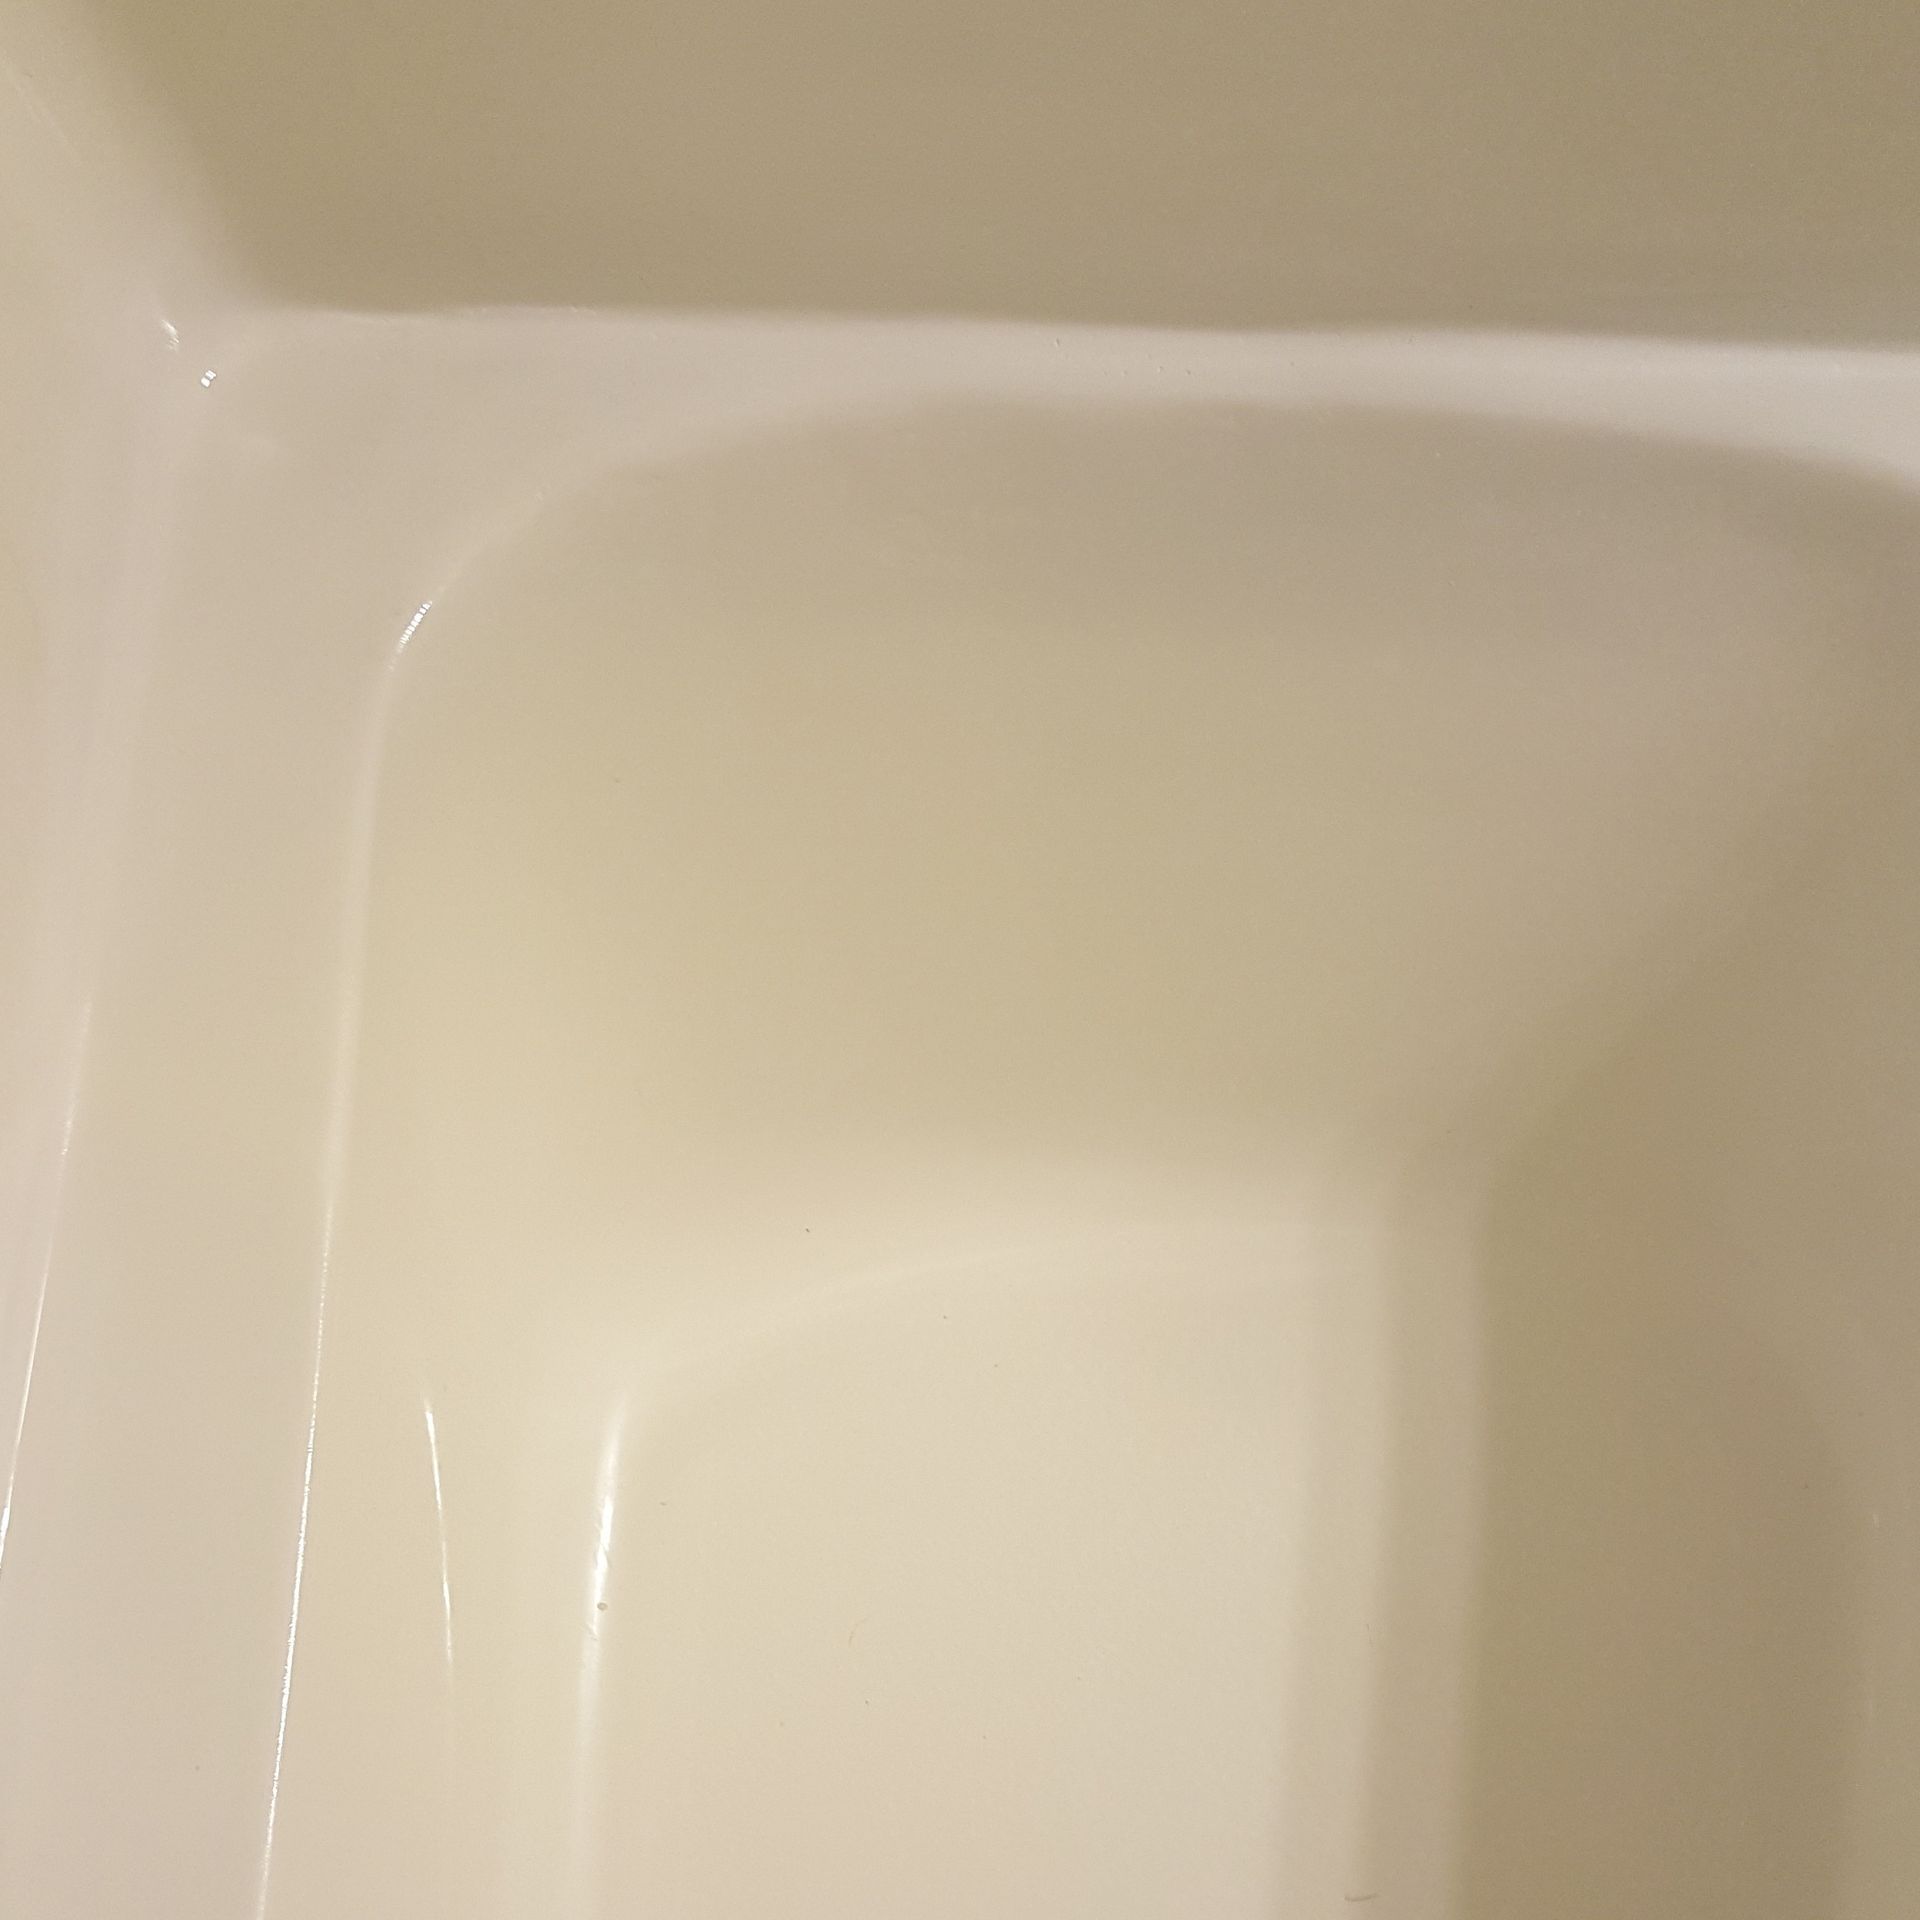 a close up of a repaired white bathtub